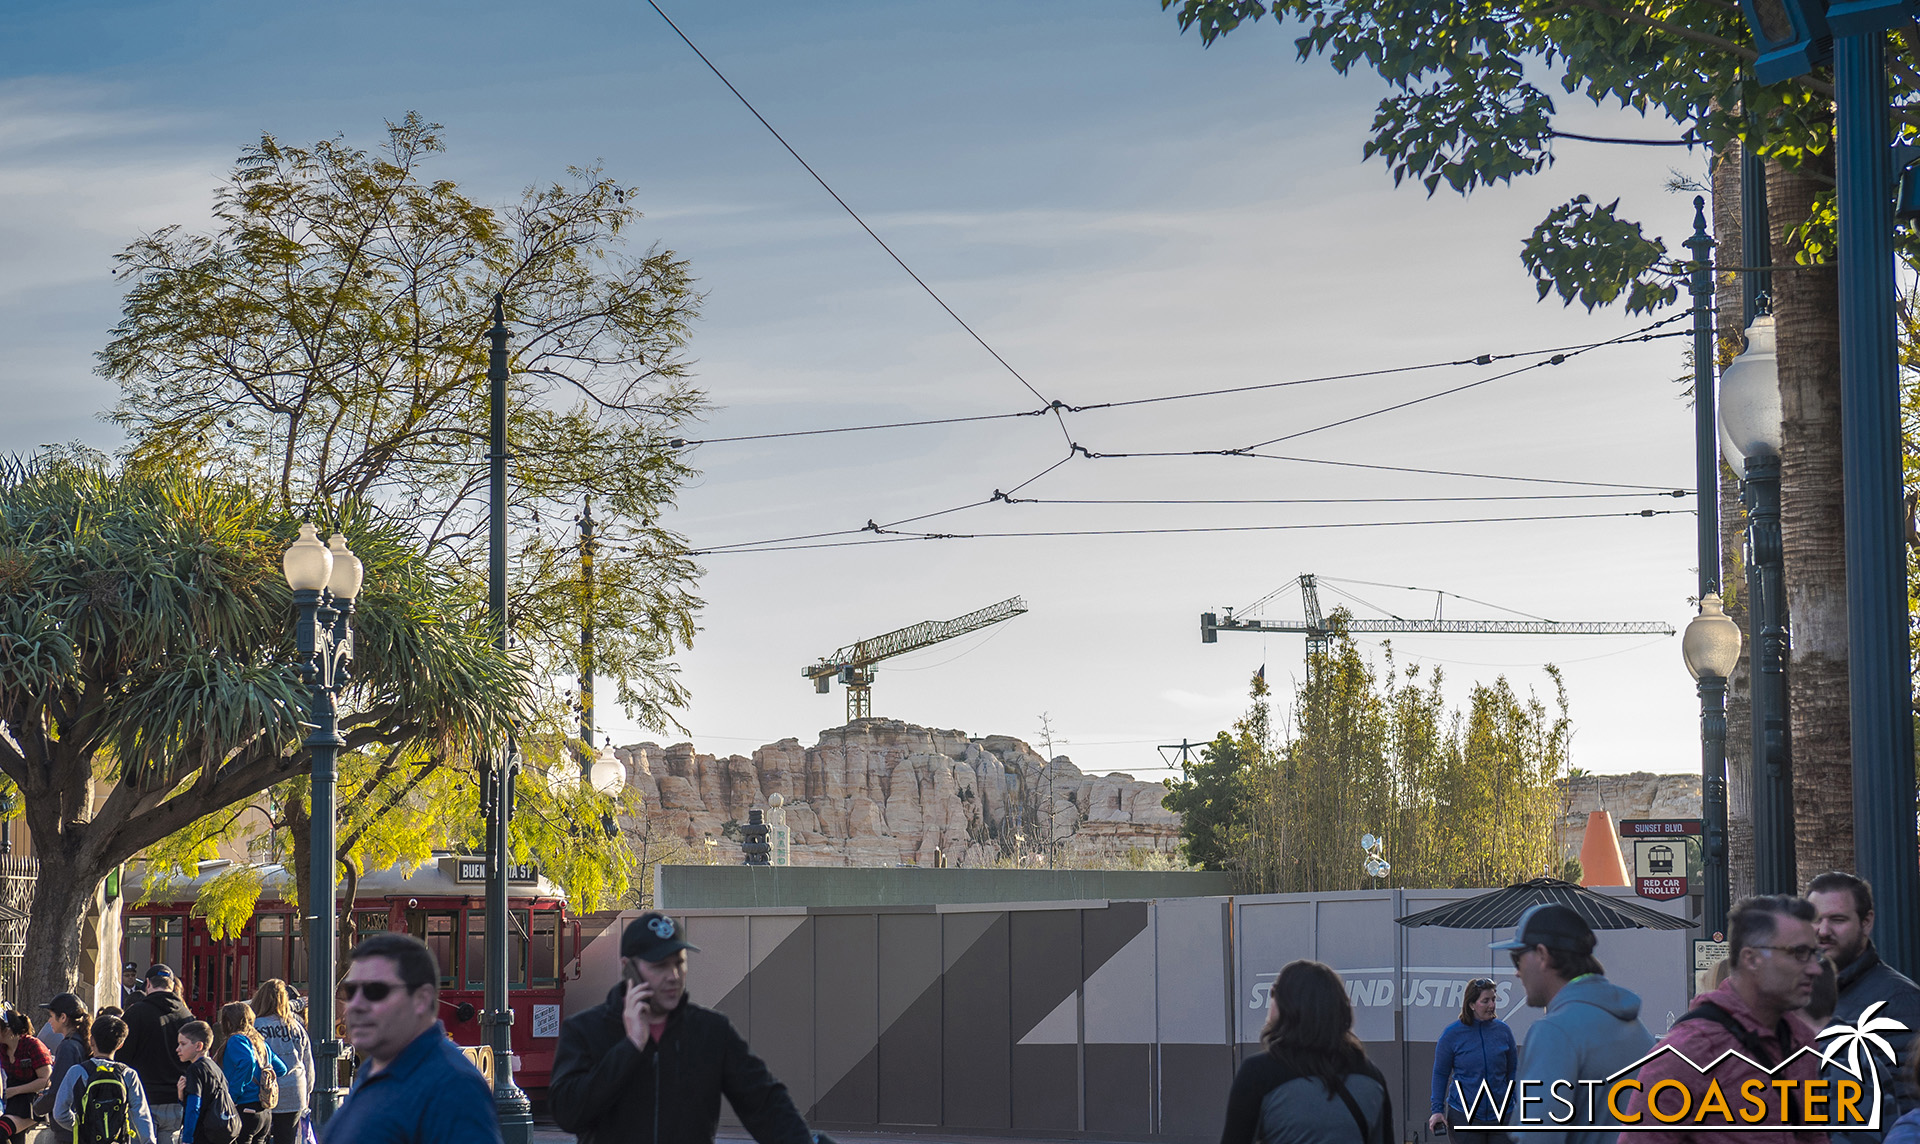  So I had every intention to get new angles of Marvel Land by going up the Pixar Pal-A-Round to photograph aerially. 